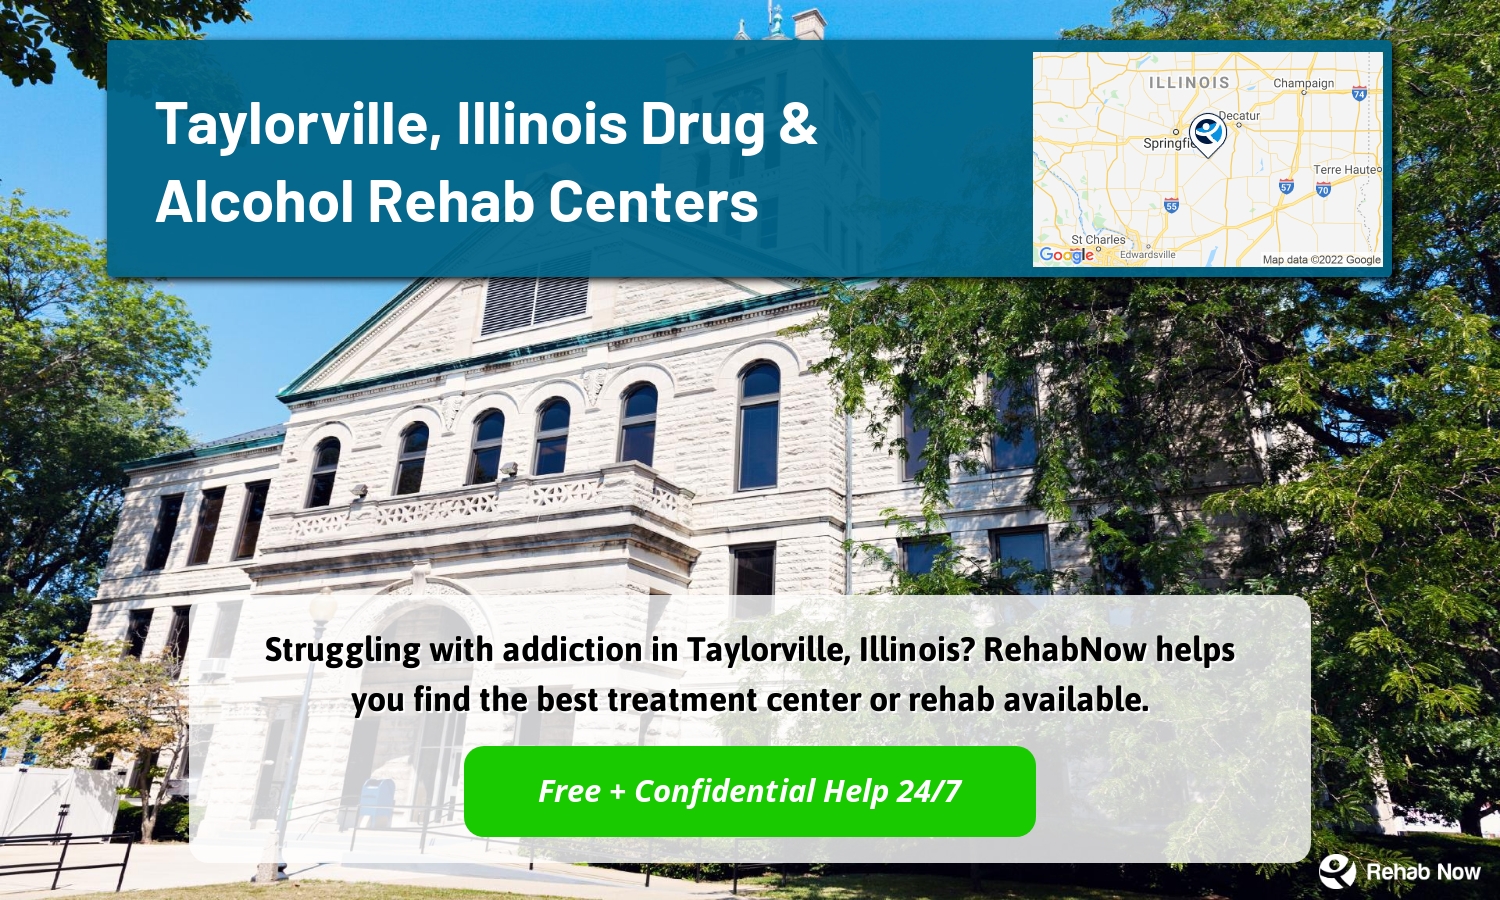 Struggling with addiction in Taylorville, Illinois? RehabNow helps you find the best treatment center or rehab available.